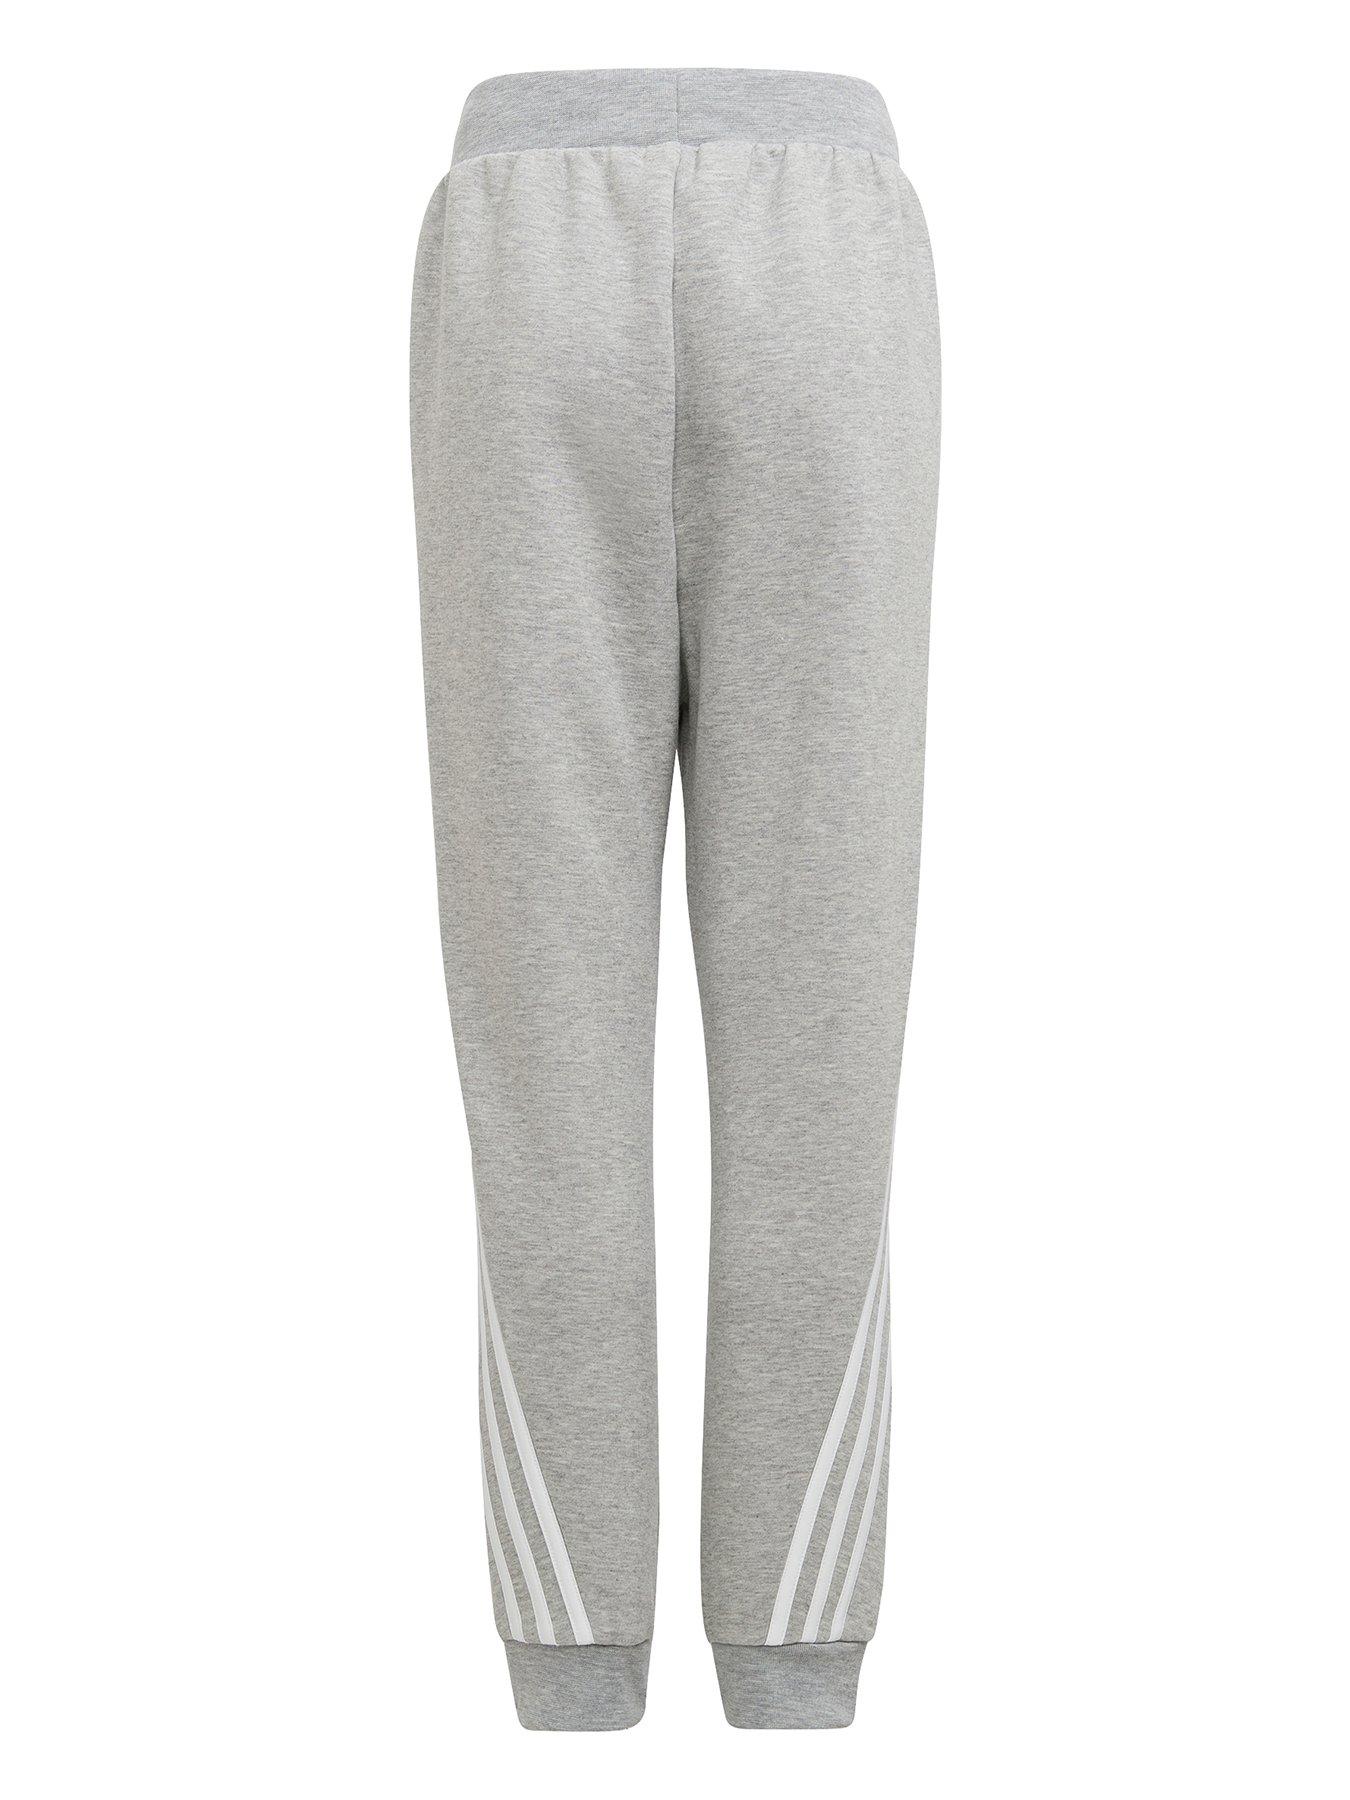 adidas Boys Future Icons 3 Stripe Tapered Pant | littlewoods.com